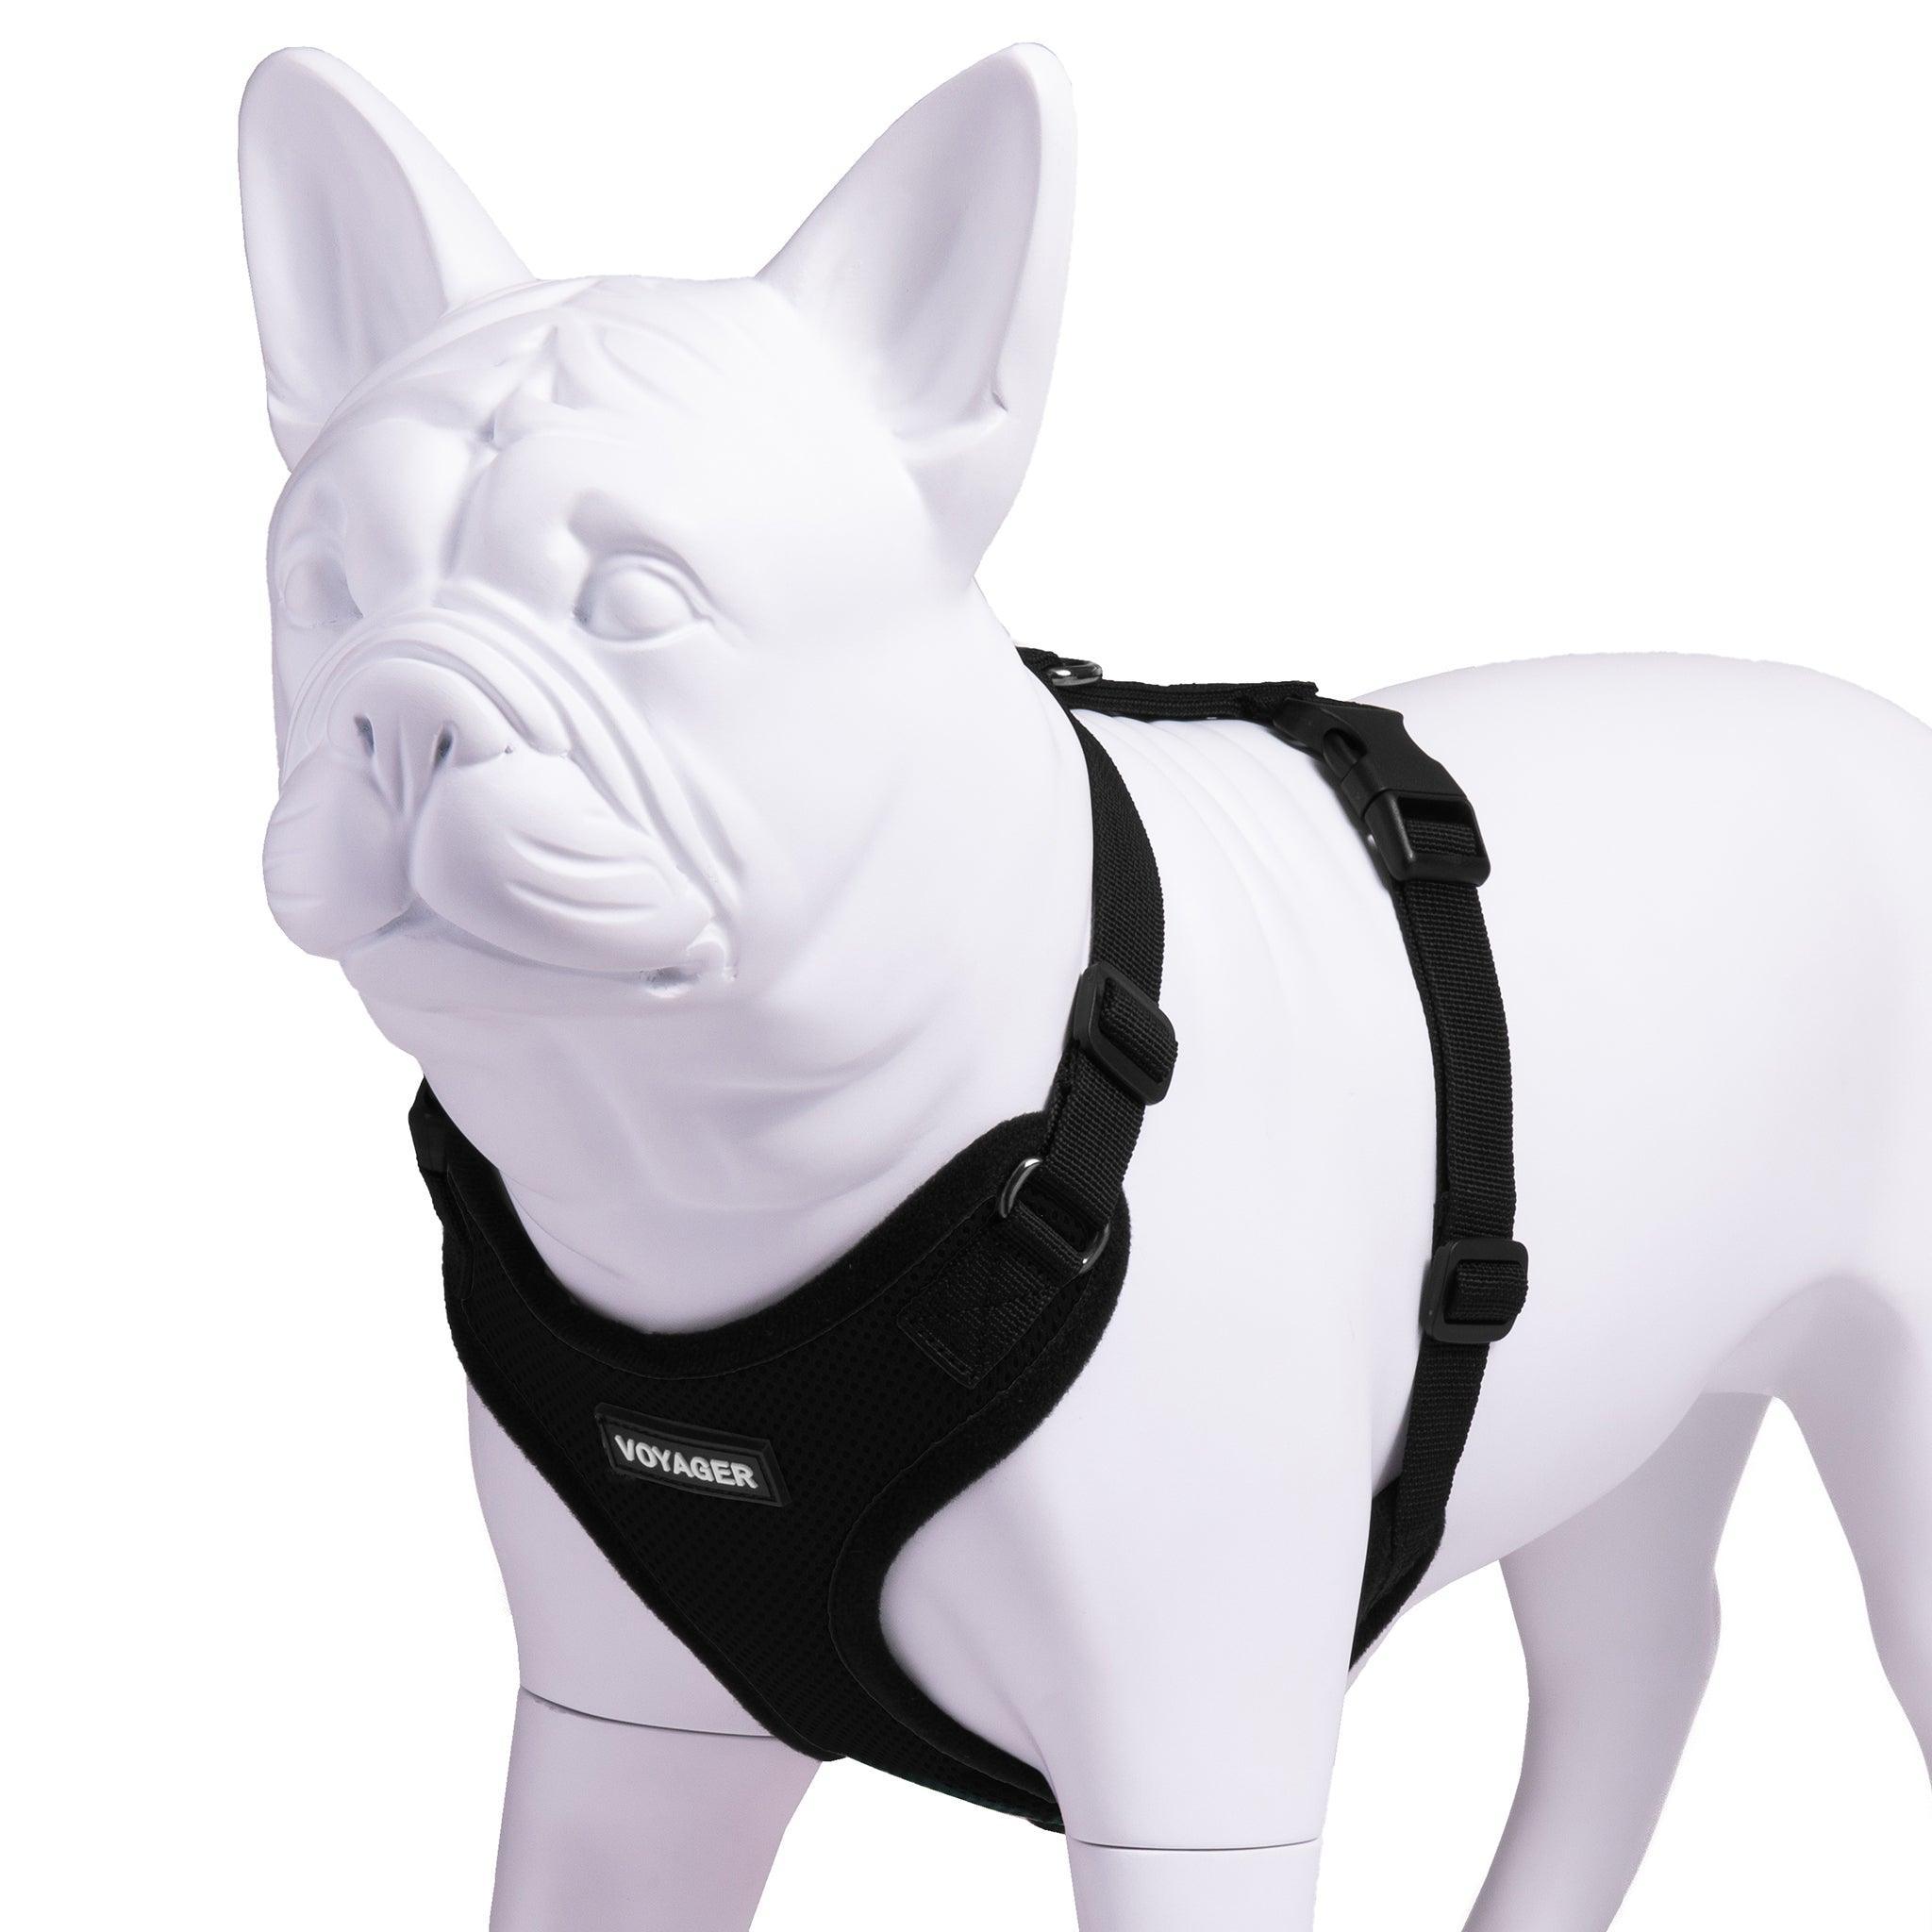 VOYAGER Step-In Lock Dog Harness in Black with Matching Trim and Webbing - Expanded